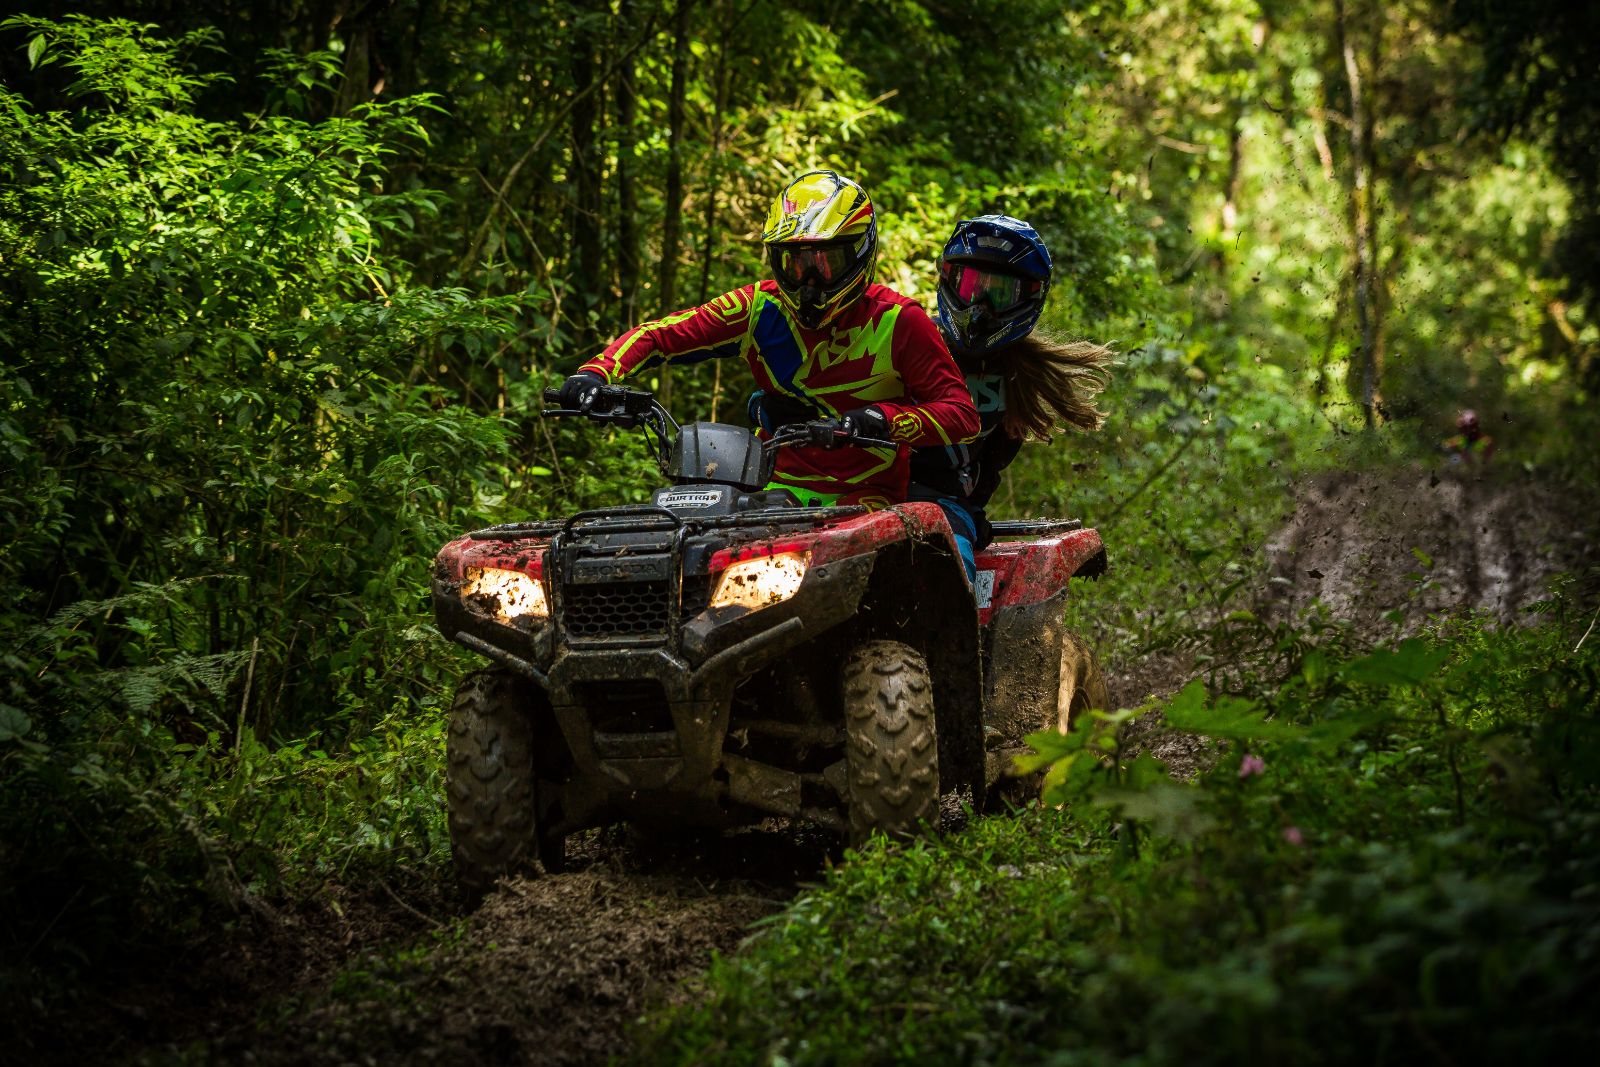 A couple on an ATV driving through the dense forest trees in the Slave Lake Region of Northern Alberta, with helmets and protective riding gear and ATV headlights towards the camera